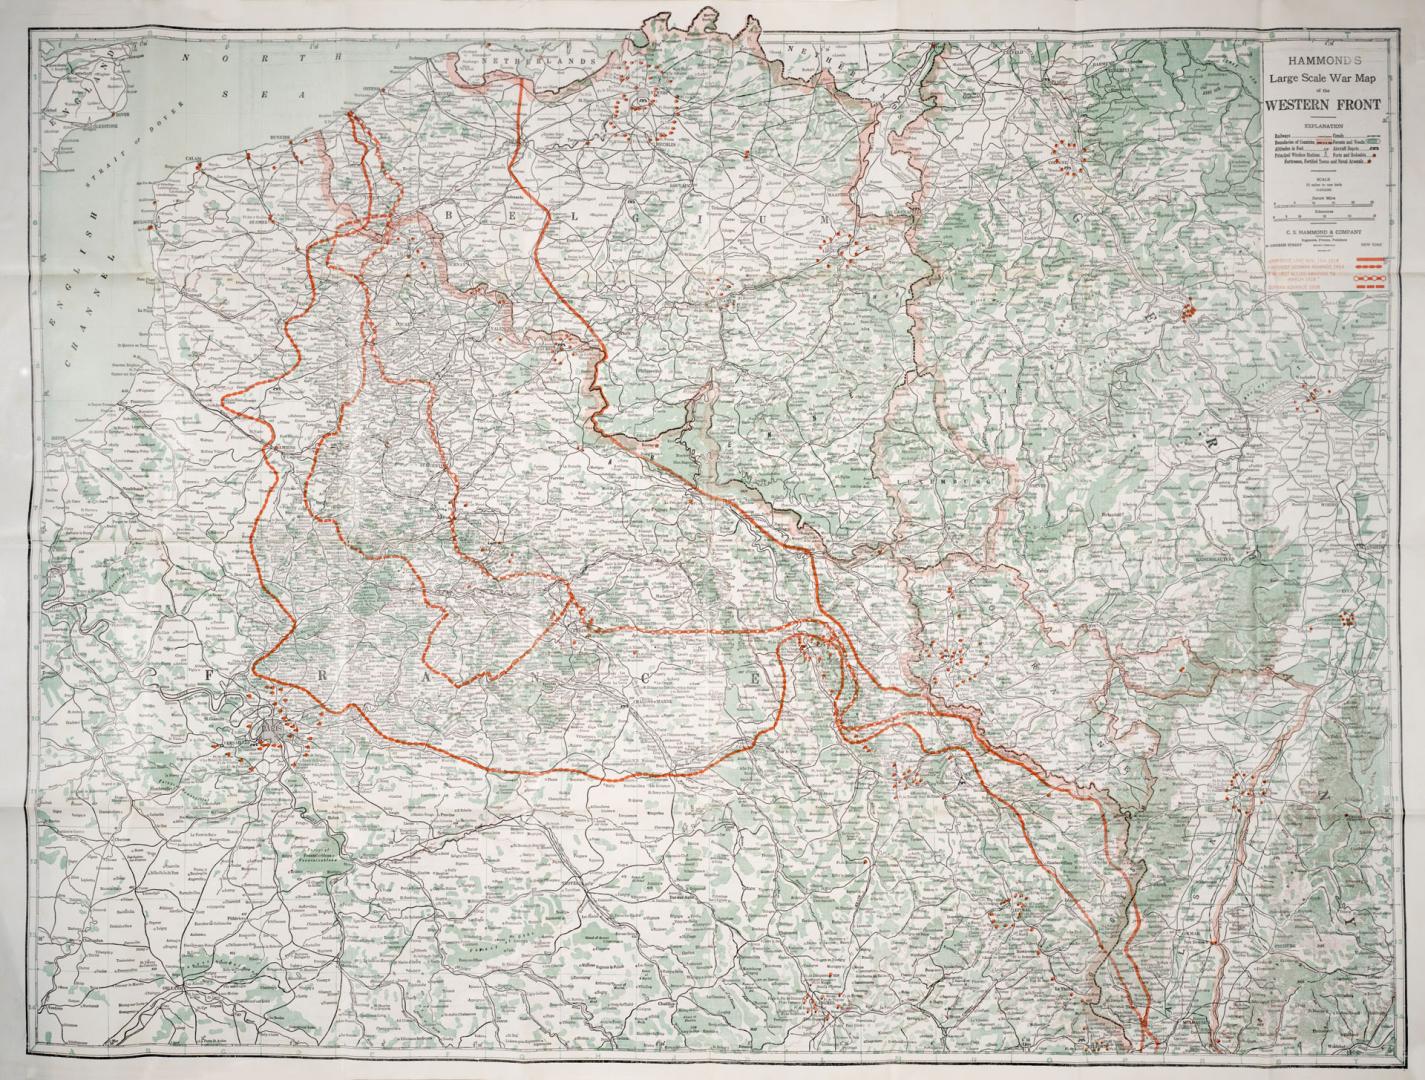 Hammond's new combination large scale war maps of the Western front and Italian front